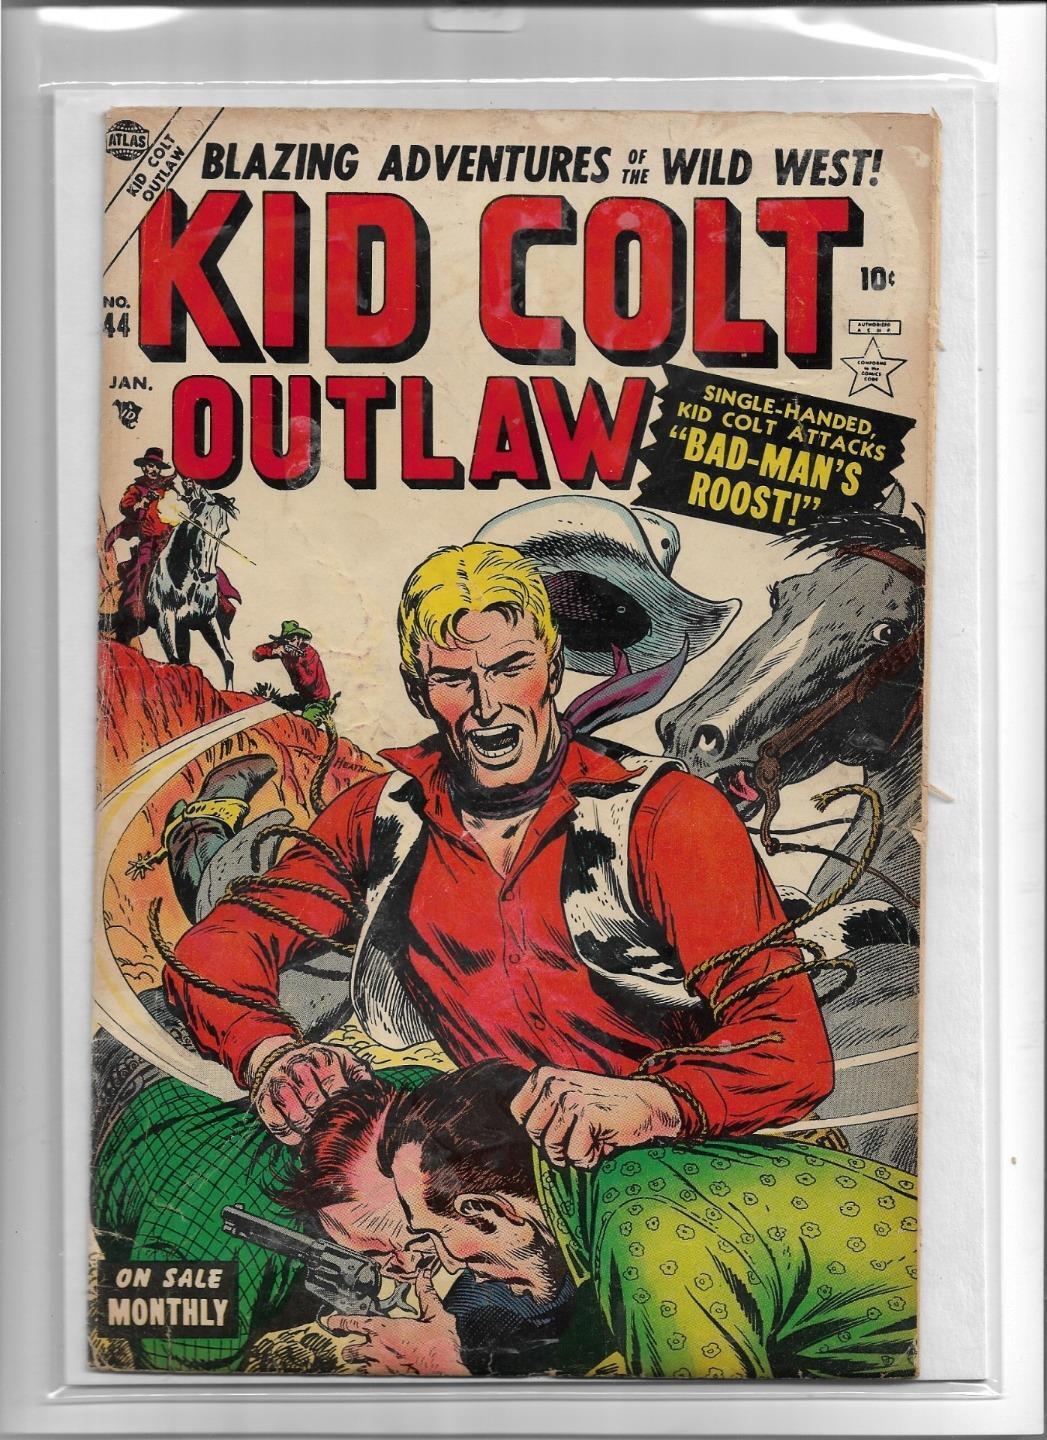 KID COLT OUTLAW #44 1955 VERY GOOD- 3.5 3489